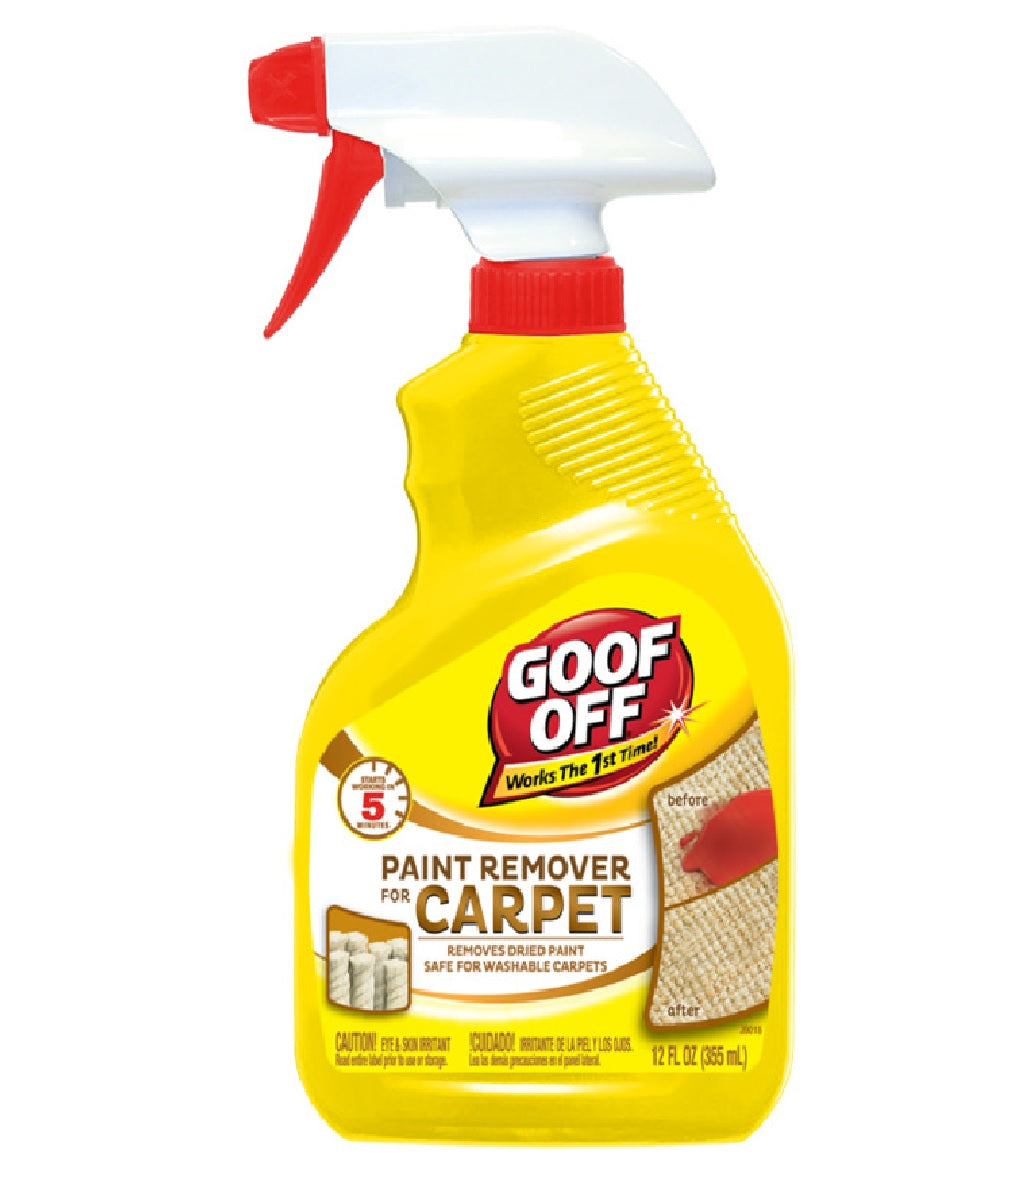 Goof Off FG910 Paint Remover for Carpet, 12 Ounce